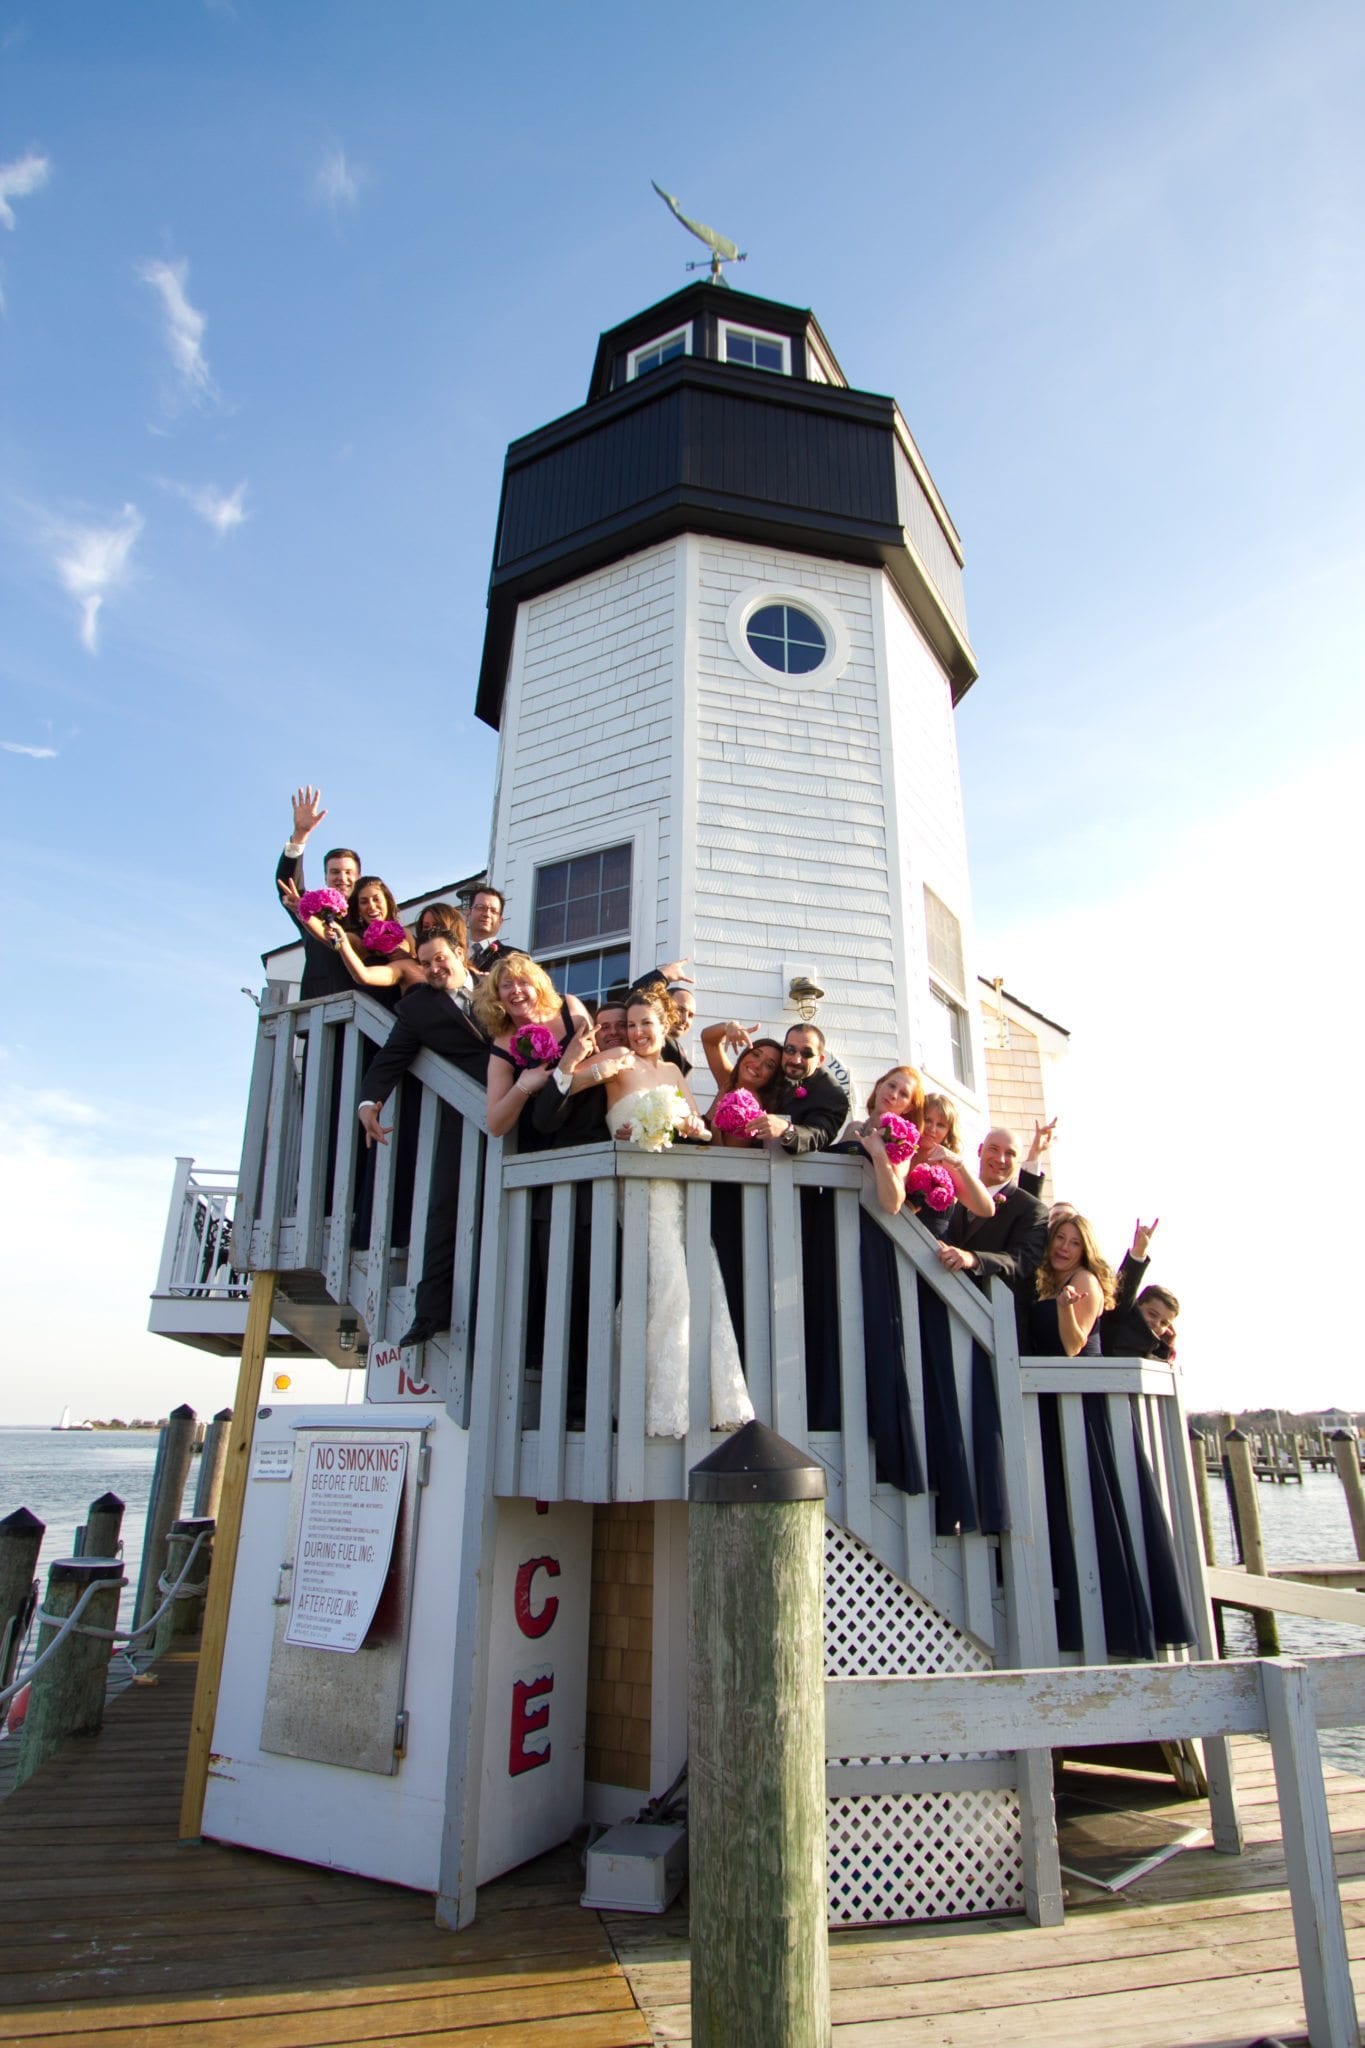 Wedding party posing on stairs of lighthouse.